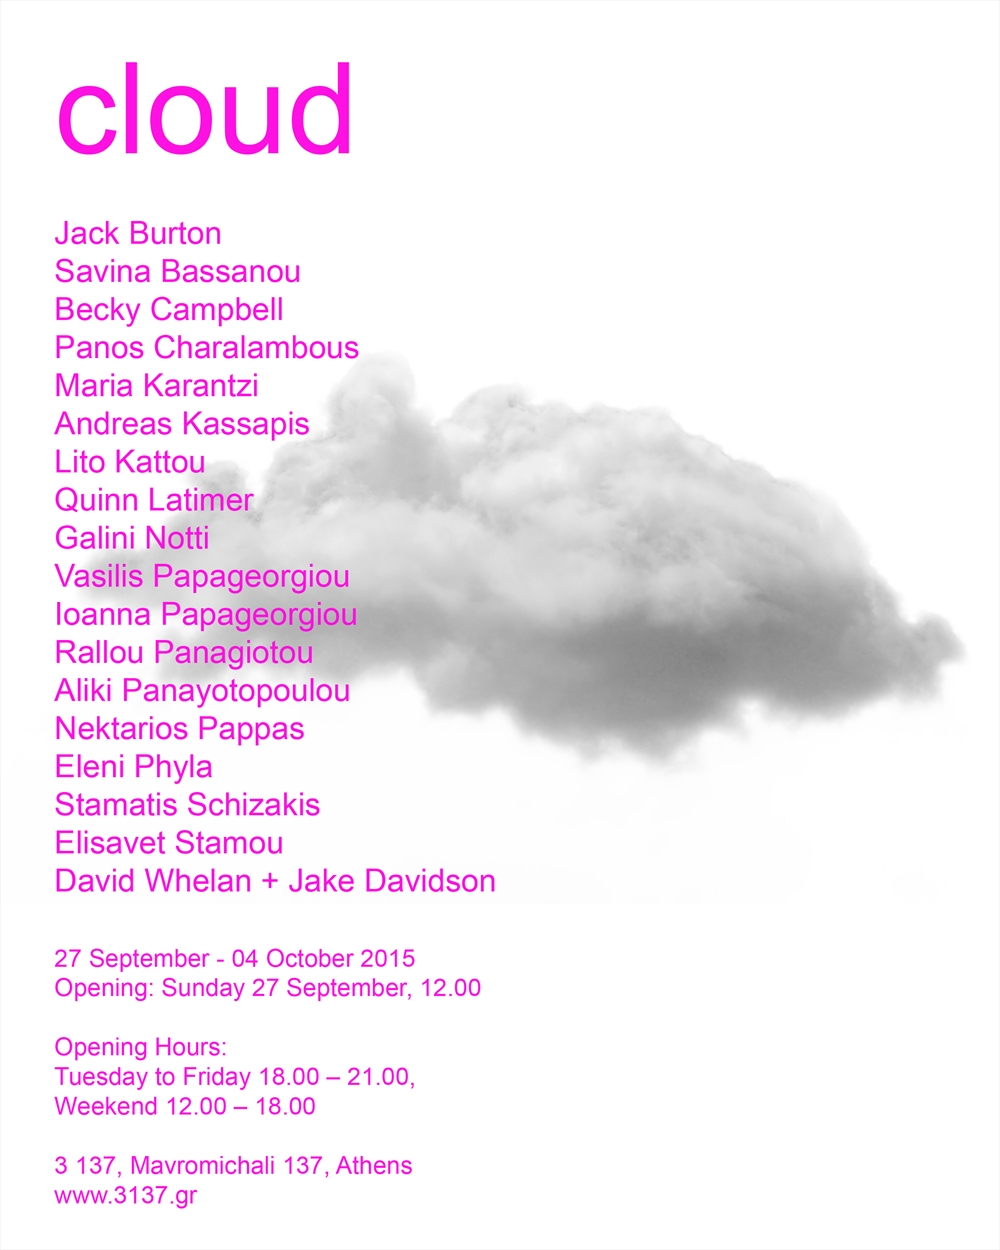 Archisearch EXAMINING THE FORM OF BOOK: CLOUD 27.09.2015 - 04.10.2015, EXARCHEIA, ATHENS